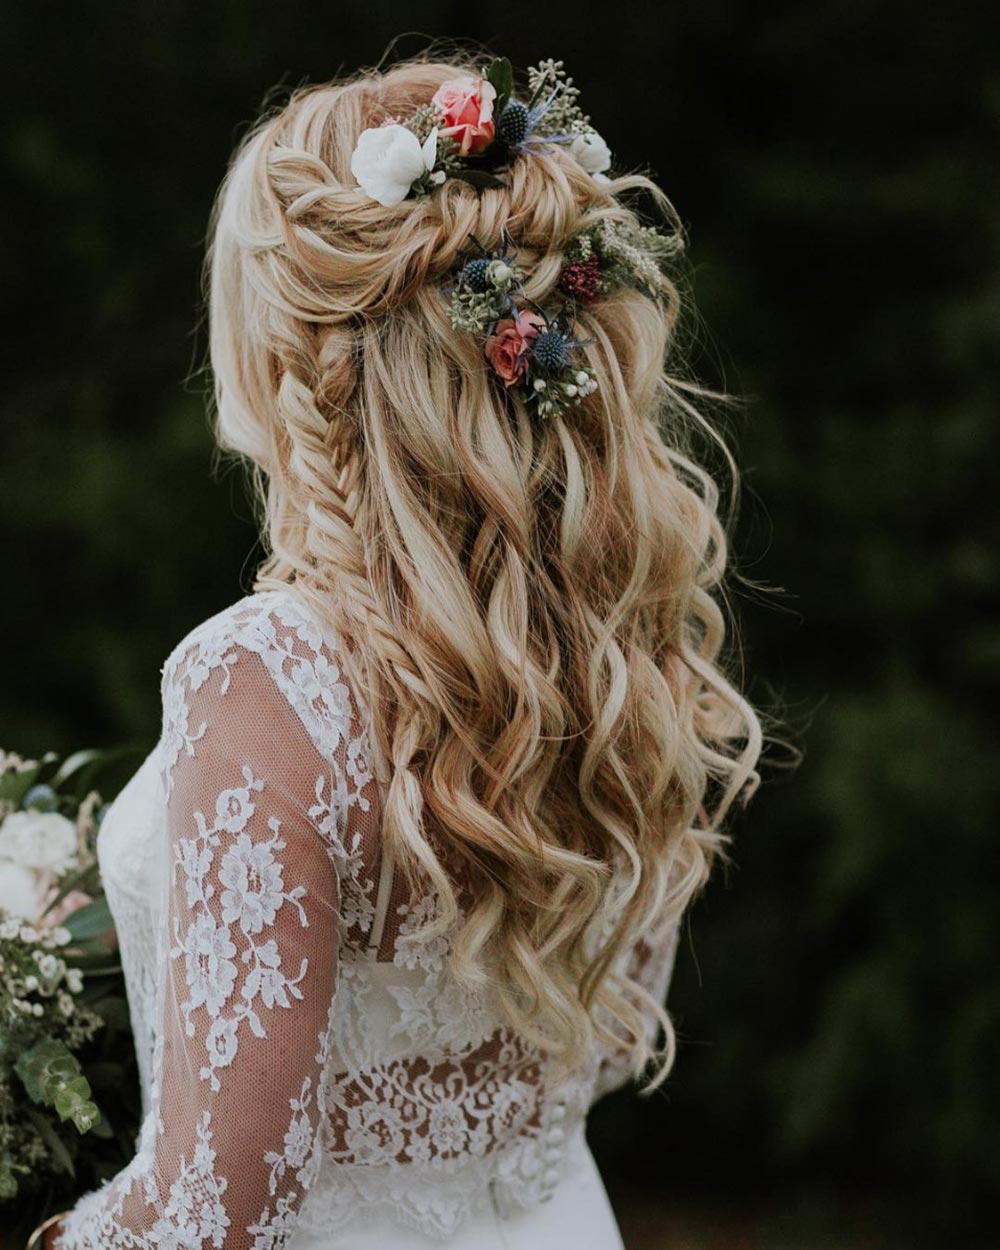 20+ Best Hairstyles For Engagement Ceremony - Wink Salon